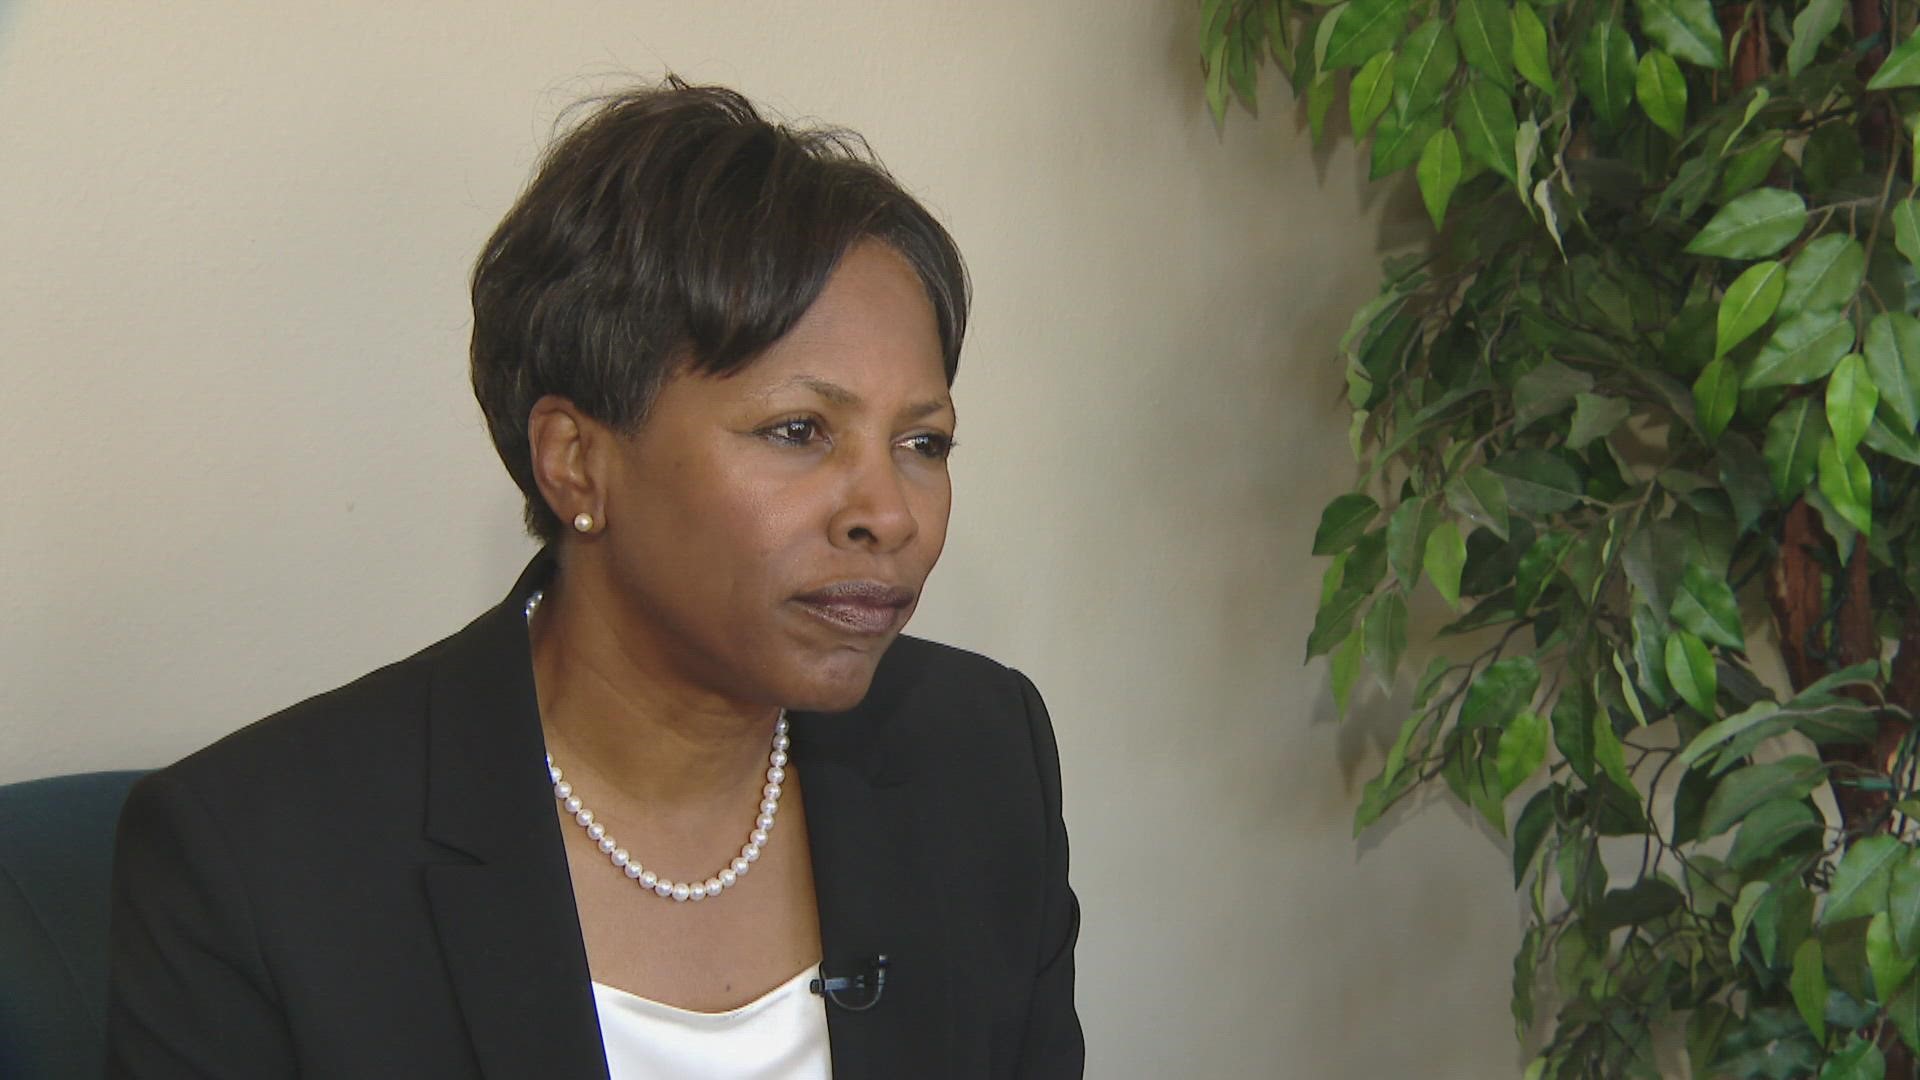 Dr. James-Ward spoke to CBS 8’s Keristen Holmes to talk about the controversy surrounding her comments that lead to her being put on administrative leave